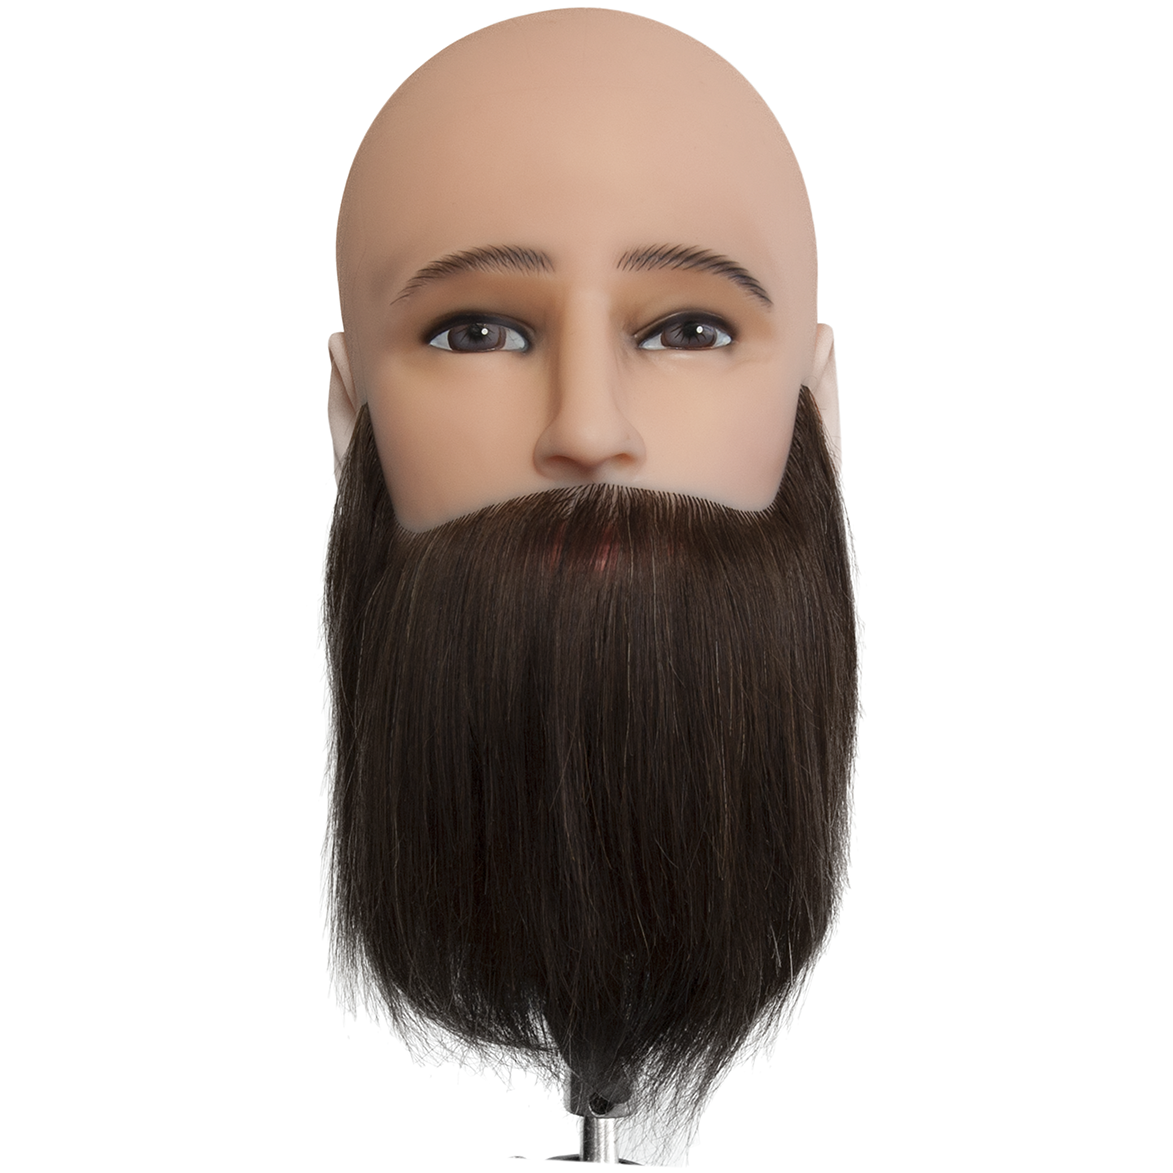 Dateline Professional Mannequin Bald Head / Bearded Indian Hair - Andrew